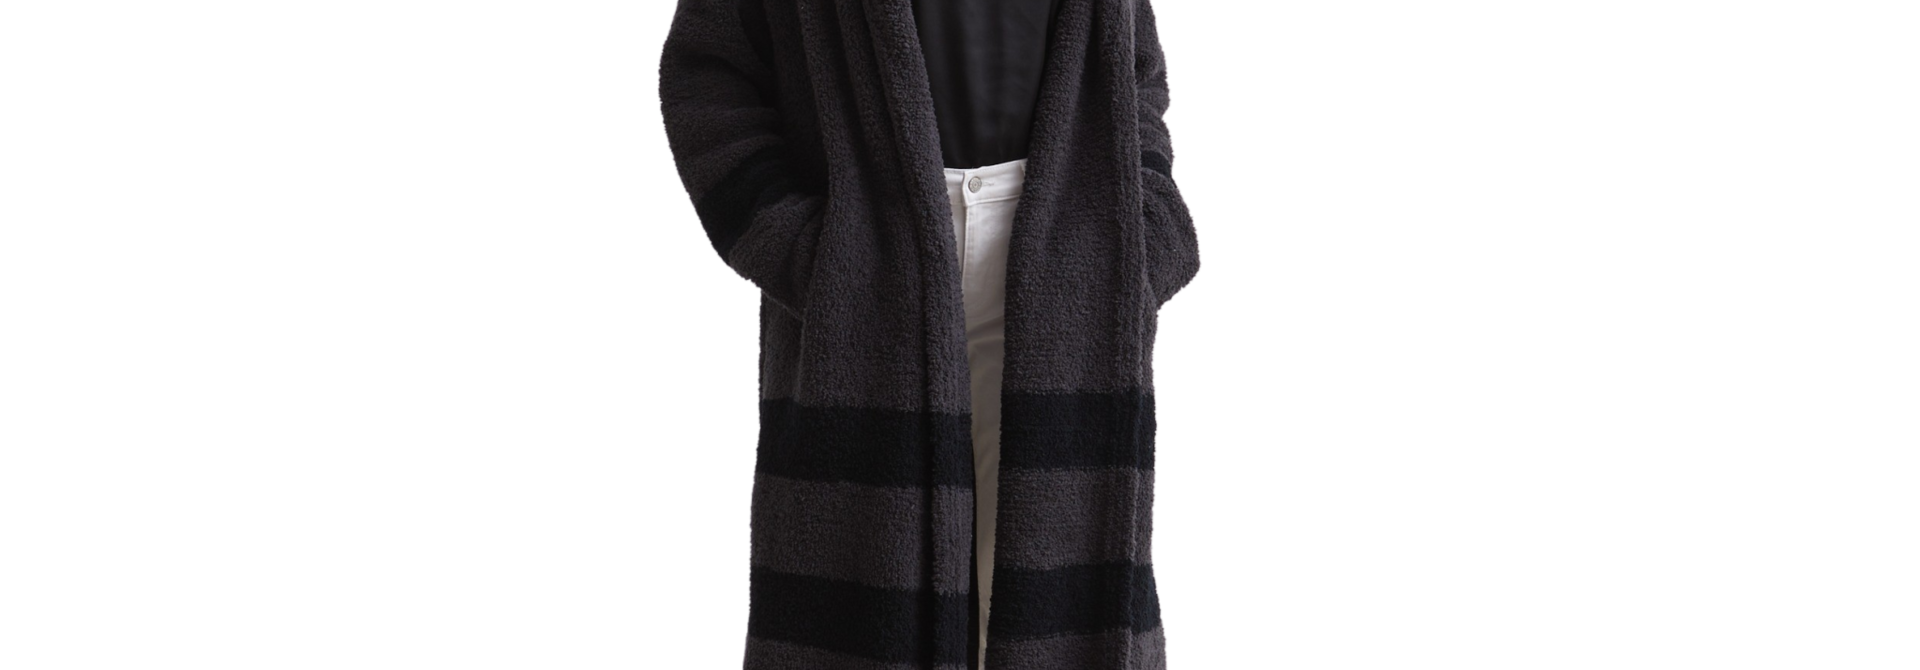 Stripe Shawl Collar | The Women's Coat Collection, - Black & Grey - One Size